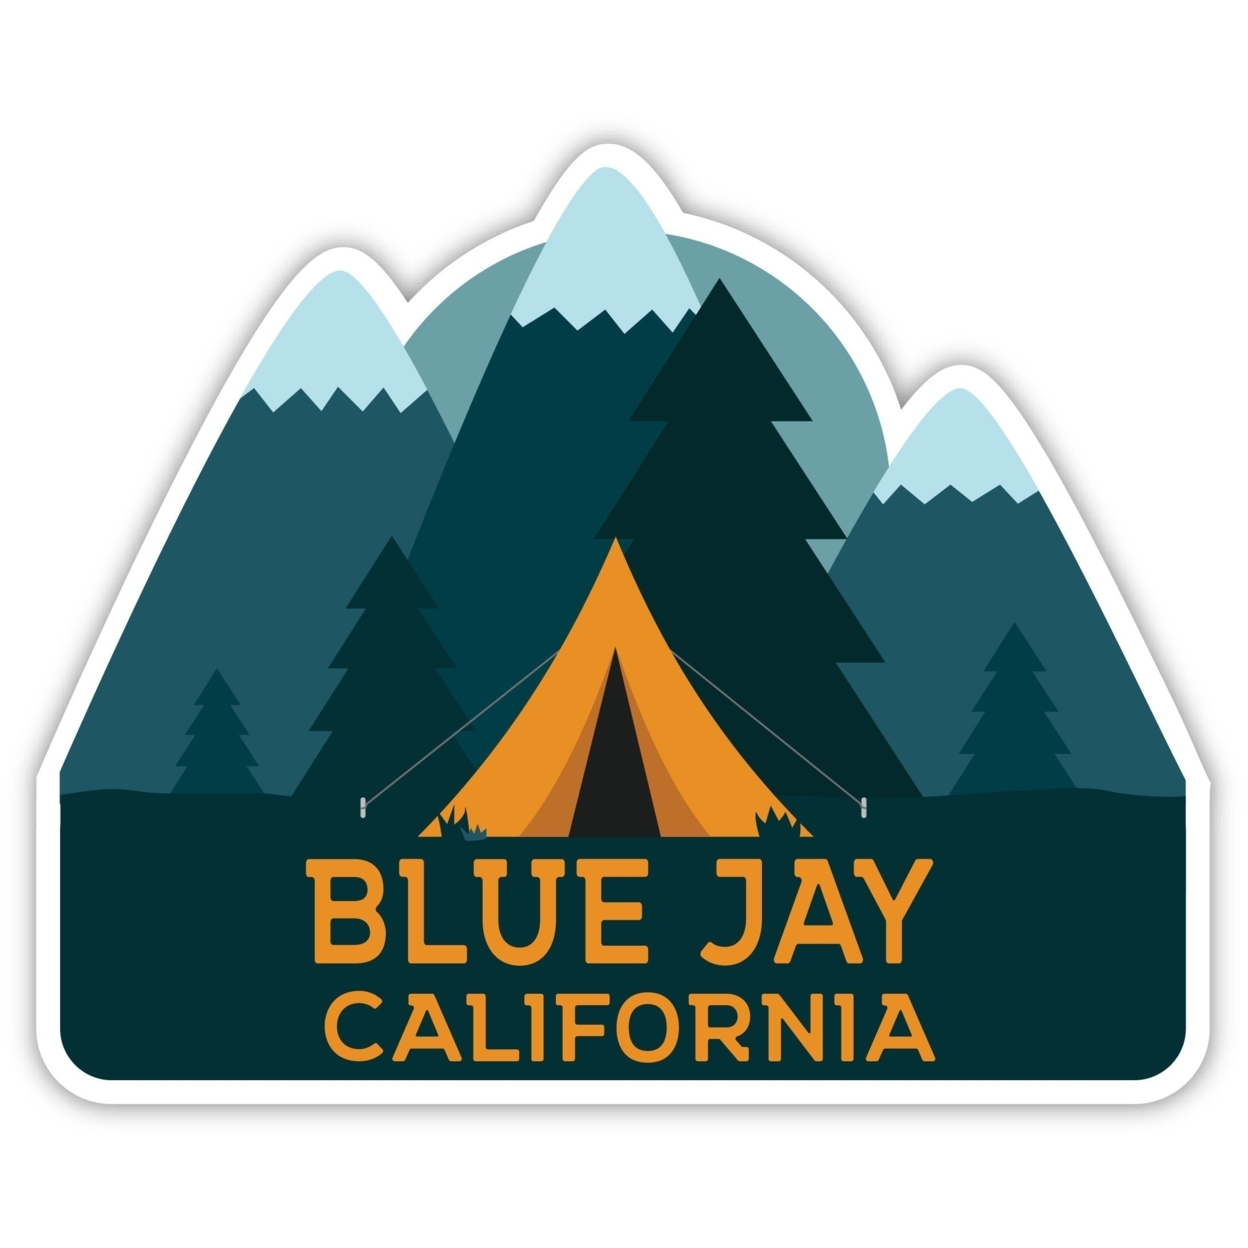 Blue Jay California Souvenir Decorative Stickers (Choose Theme And Size) - 4-Pack, 10-Inch, Tent